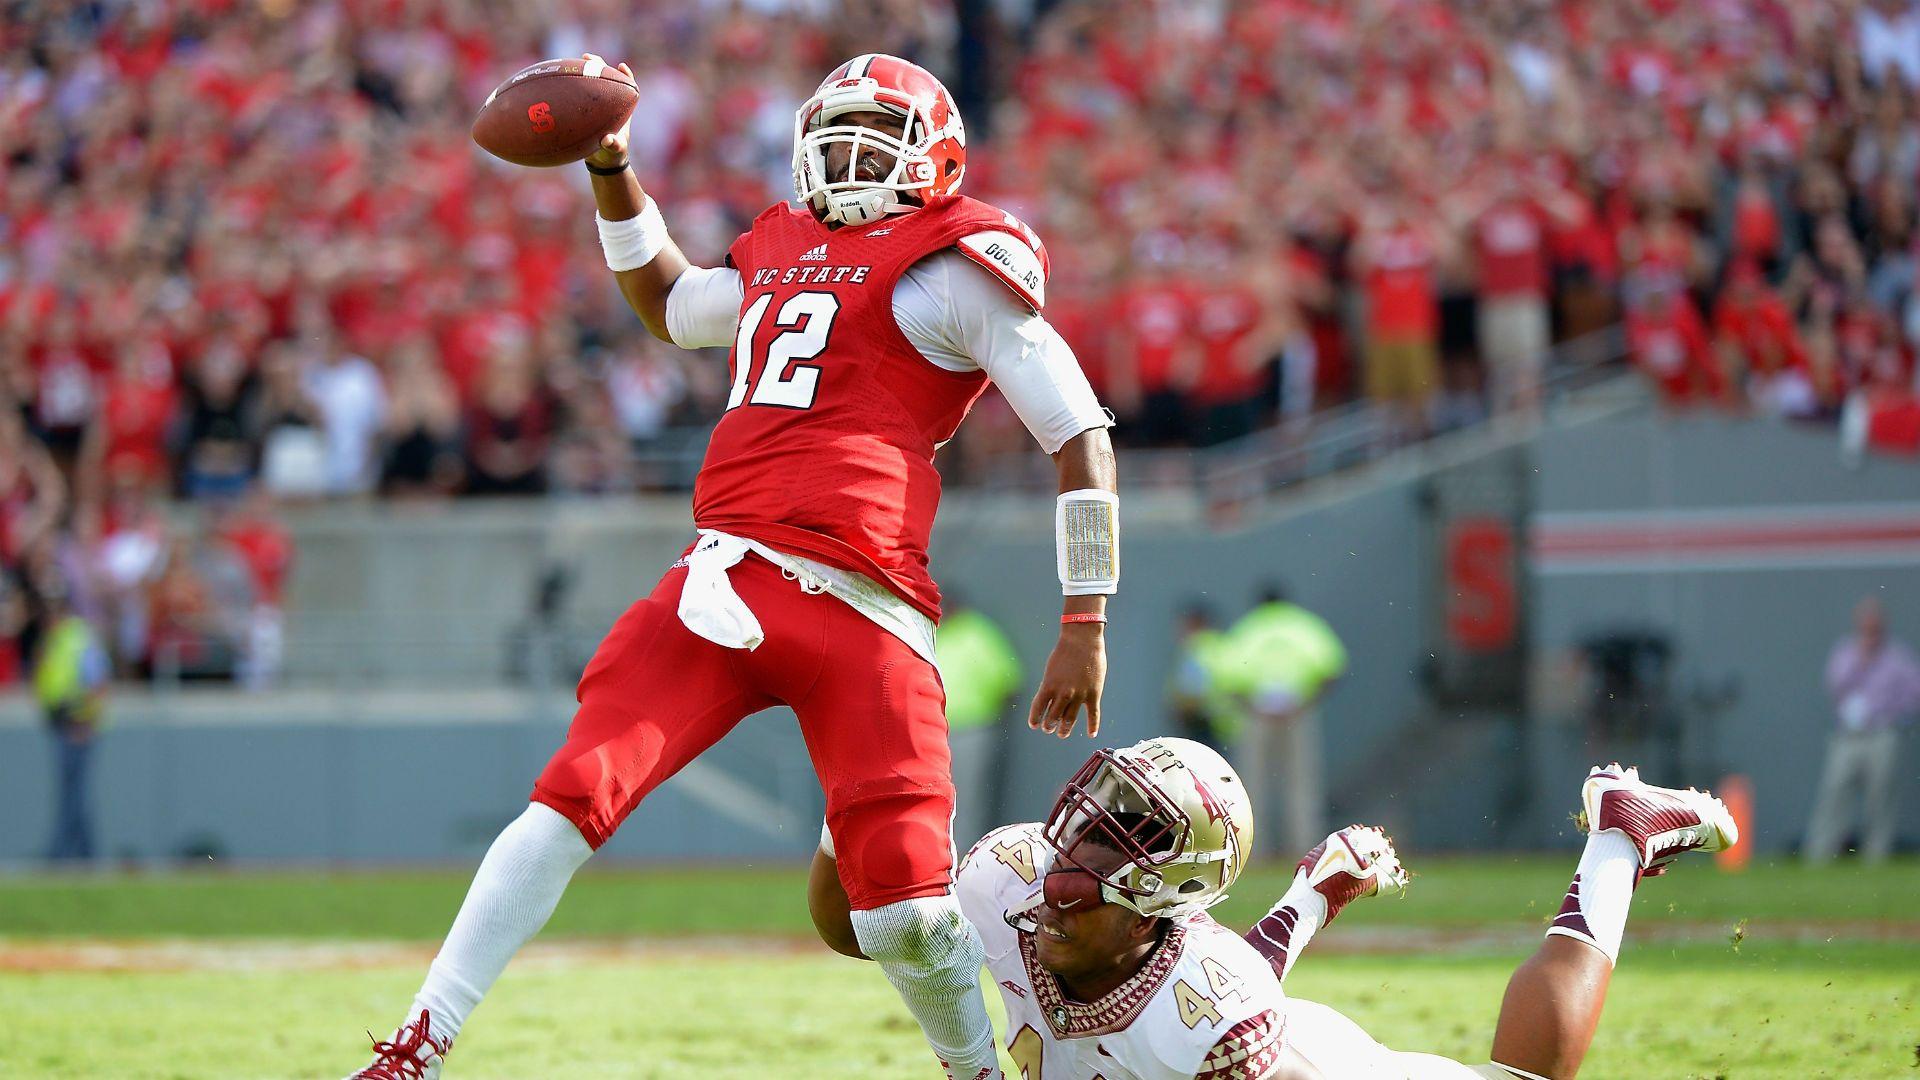 Jacoby Brissett leads incredible touchdown drive against FSU